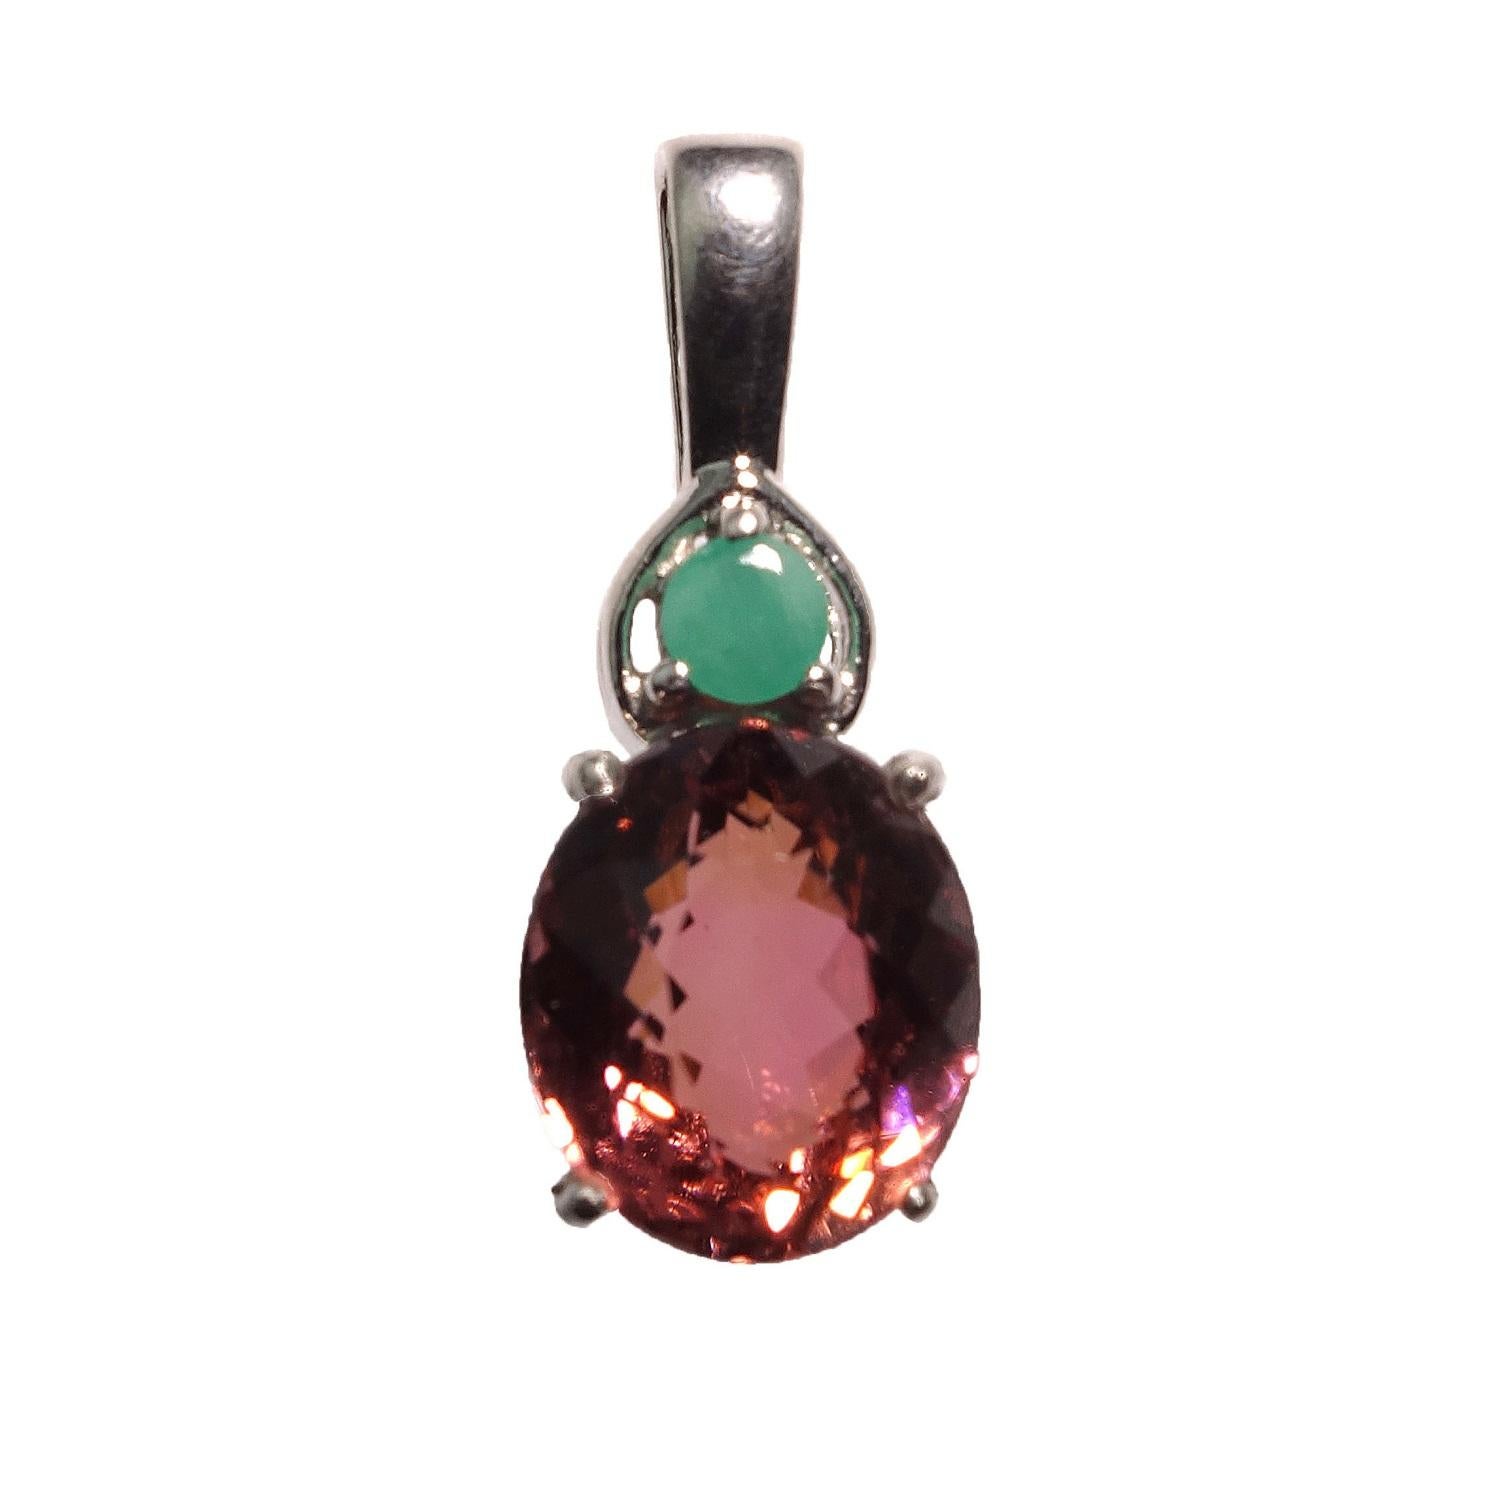 Unique, sparkling, peachy-brown (hint of pink) shade of oval Brazilian Tourmaline in Sterling Silver pendant. This lovely tourmaline is accented with a bright green round emerald. The gorgeous 10mm x 8mm tourmaline almost jumps out of the setting it